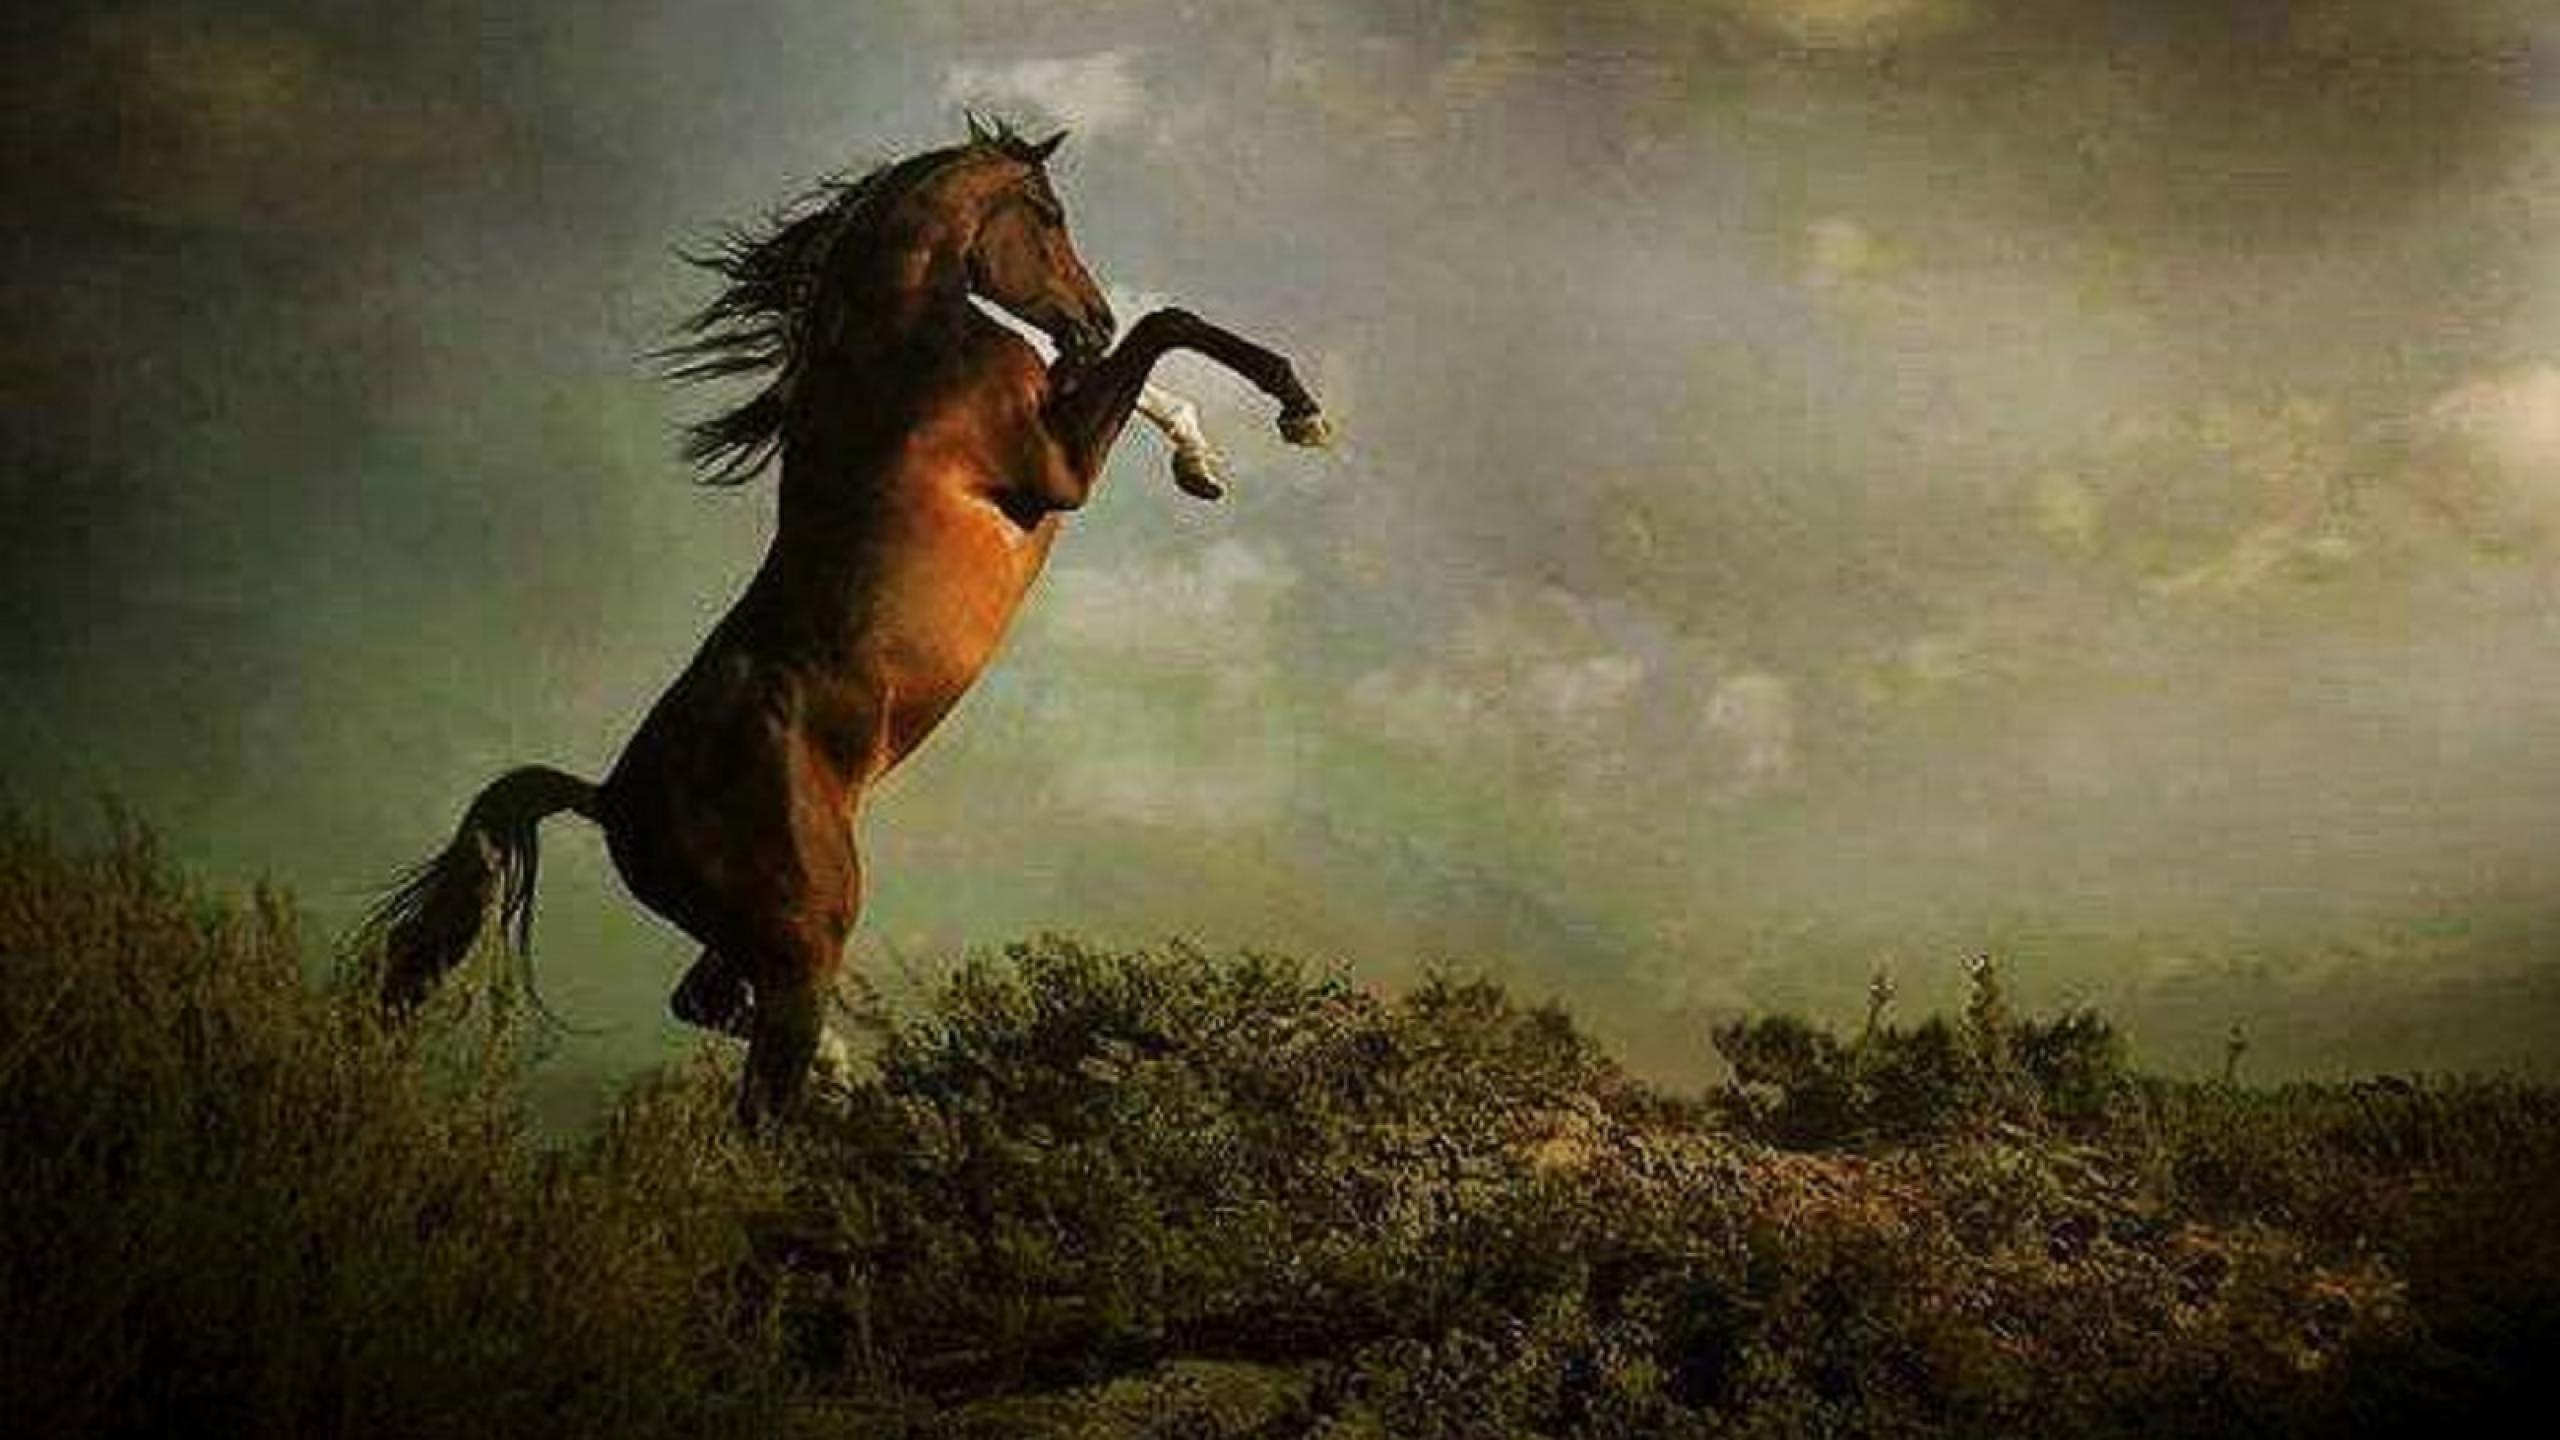 Horse Painting Wallpaper Pictures Image